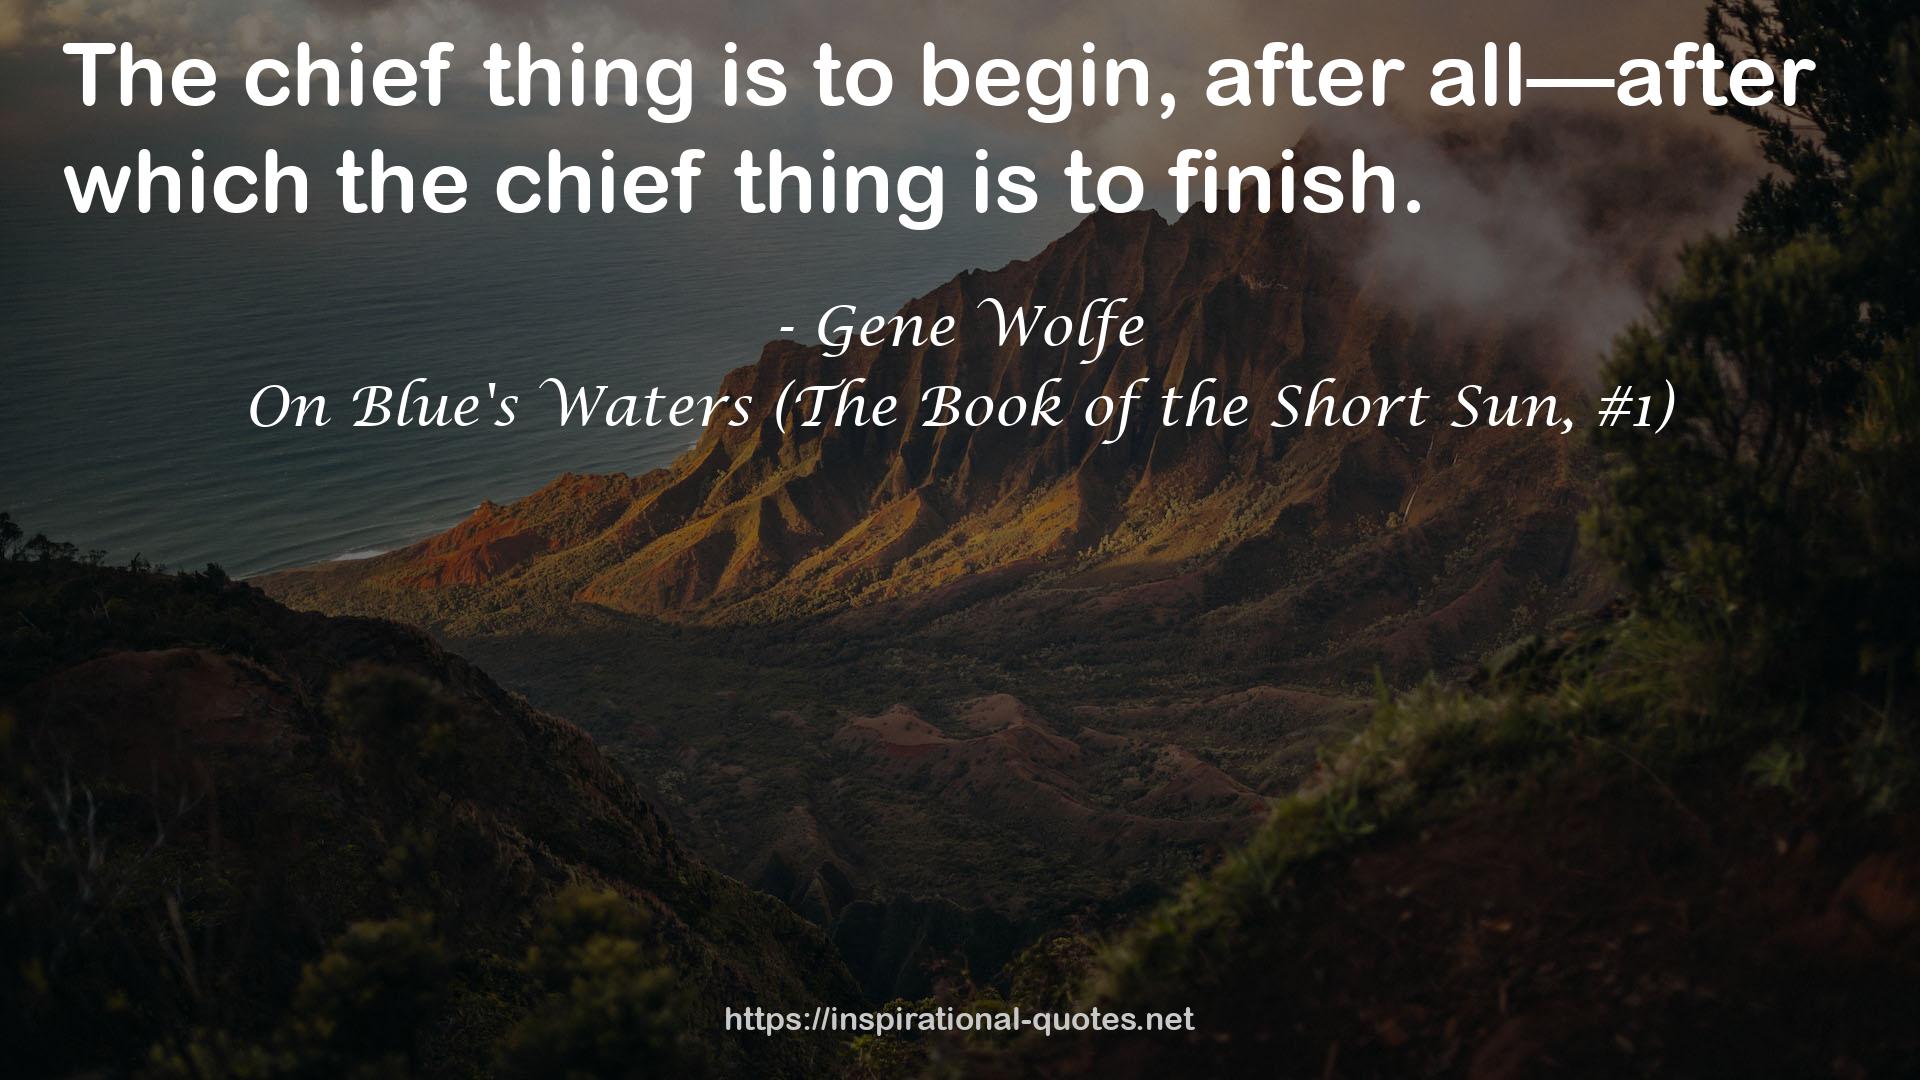 On Blue's Waters (The Book of the Short Sun, #1) QUOTES